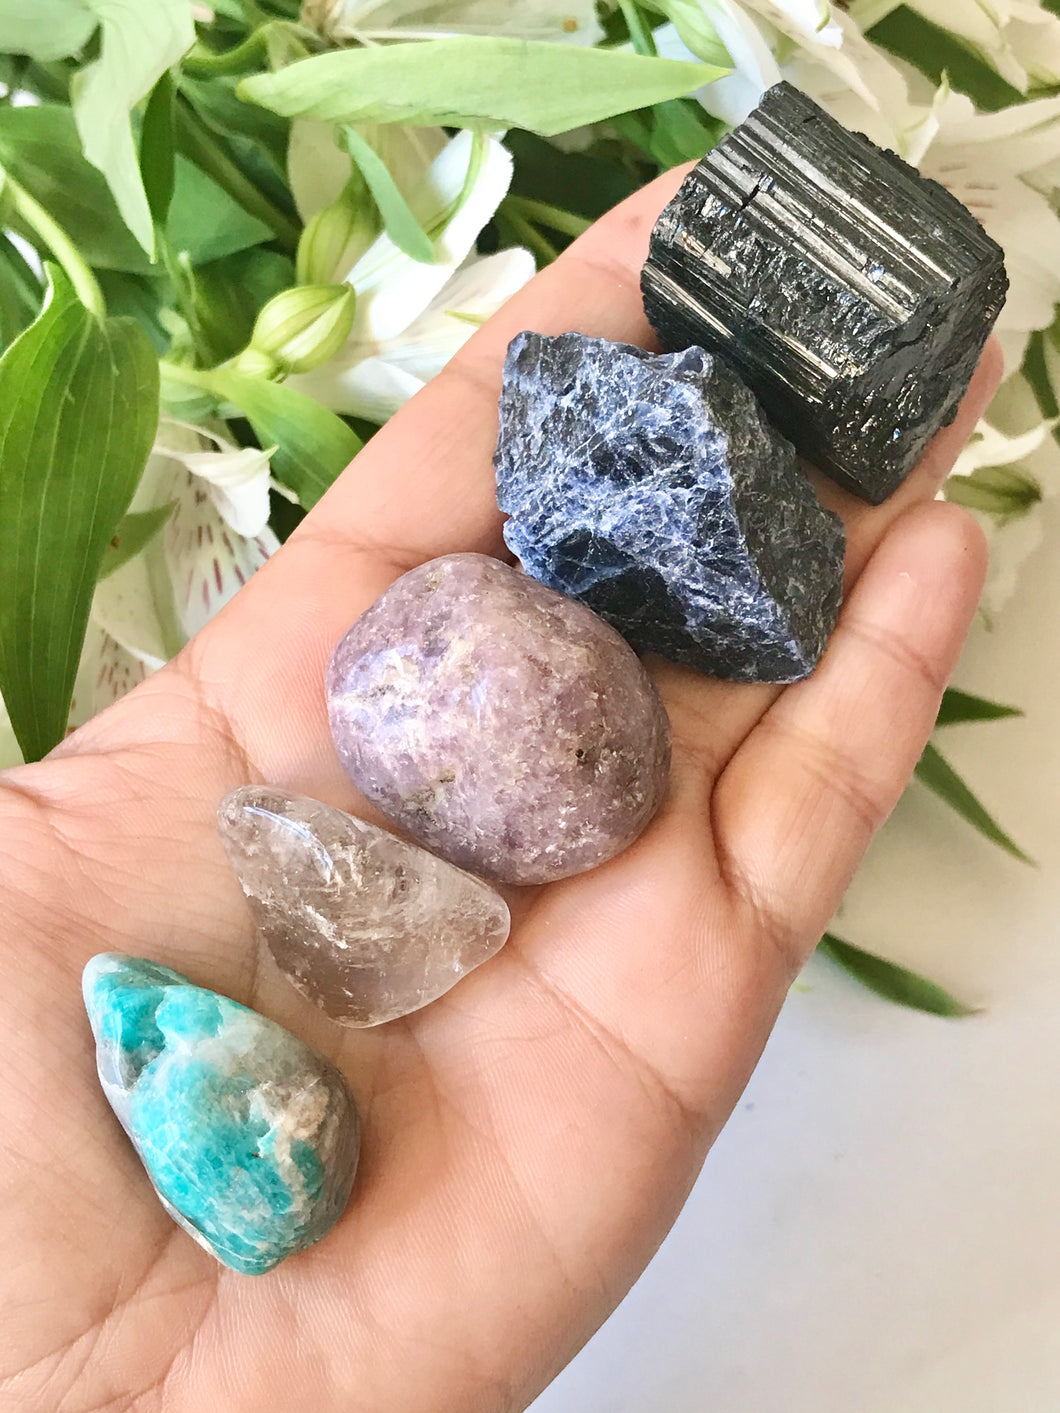 Crystals for EMF Protection